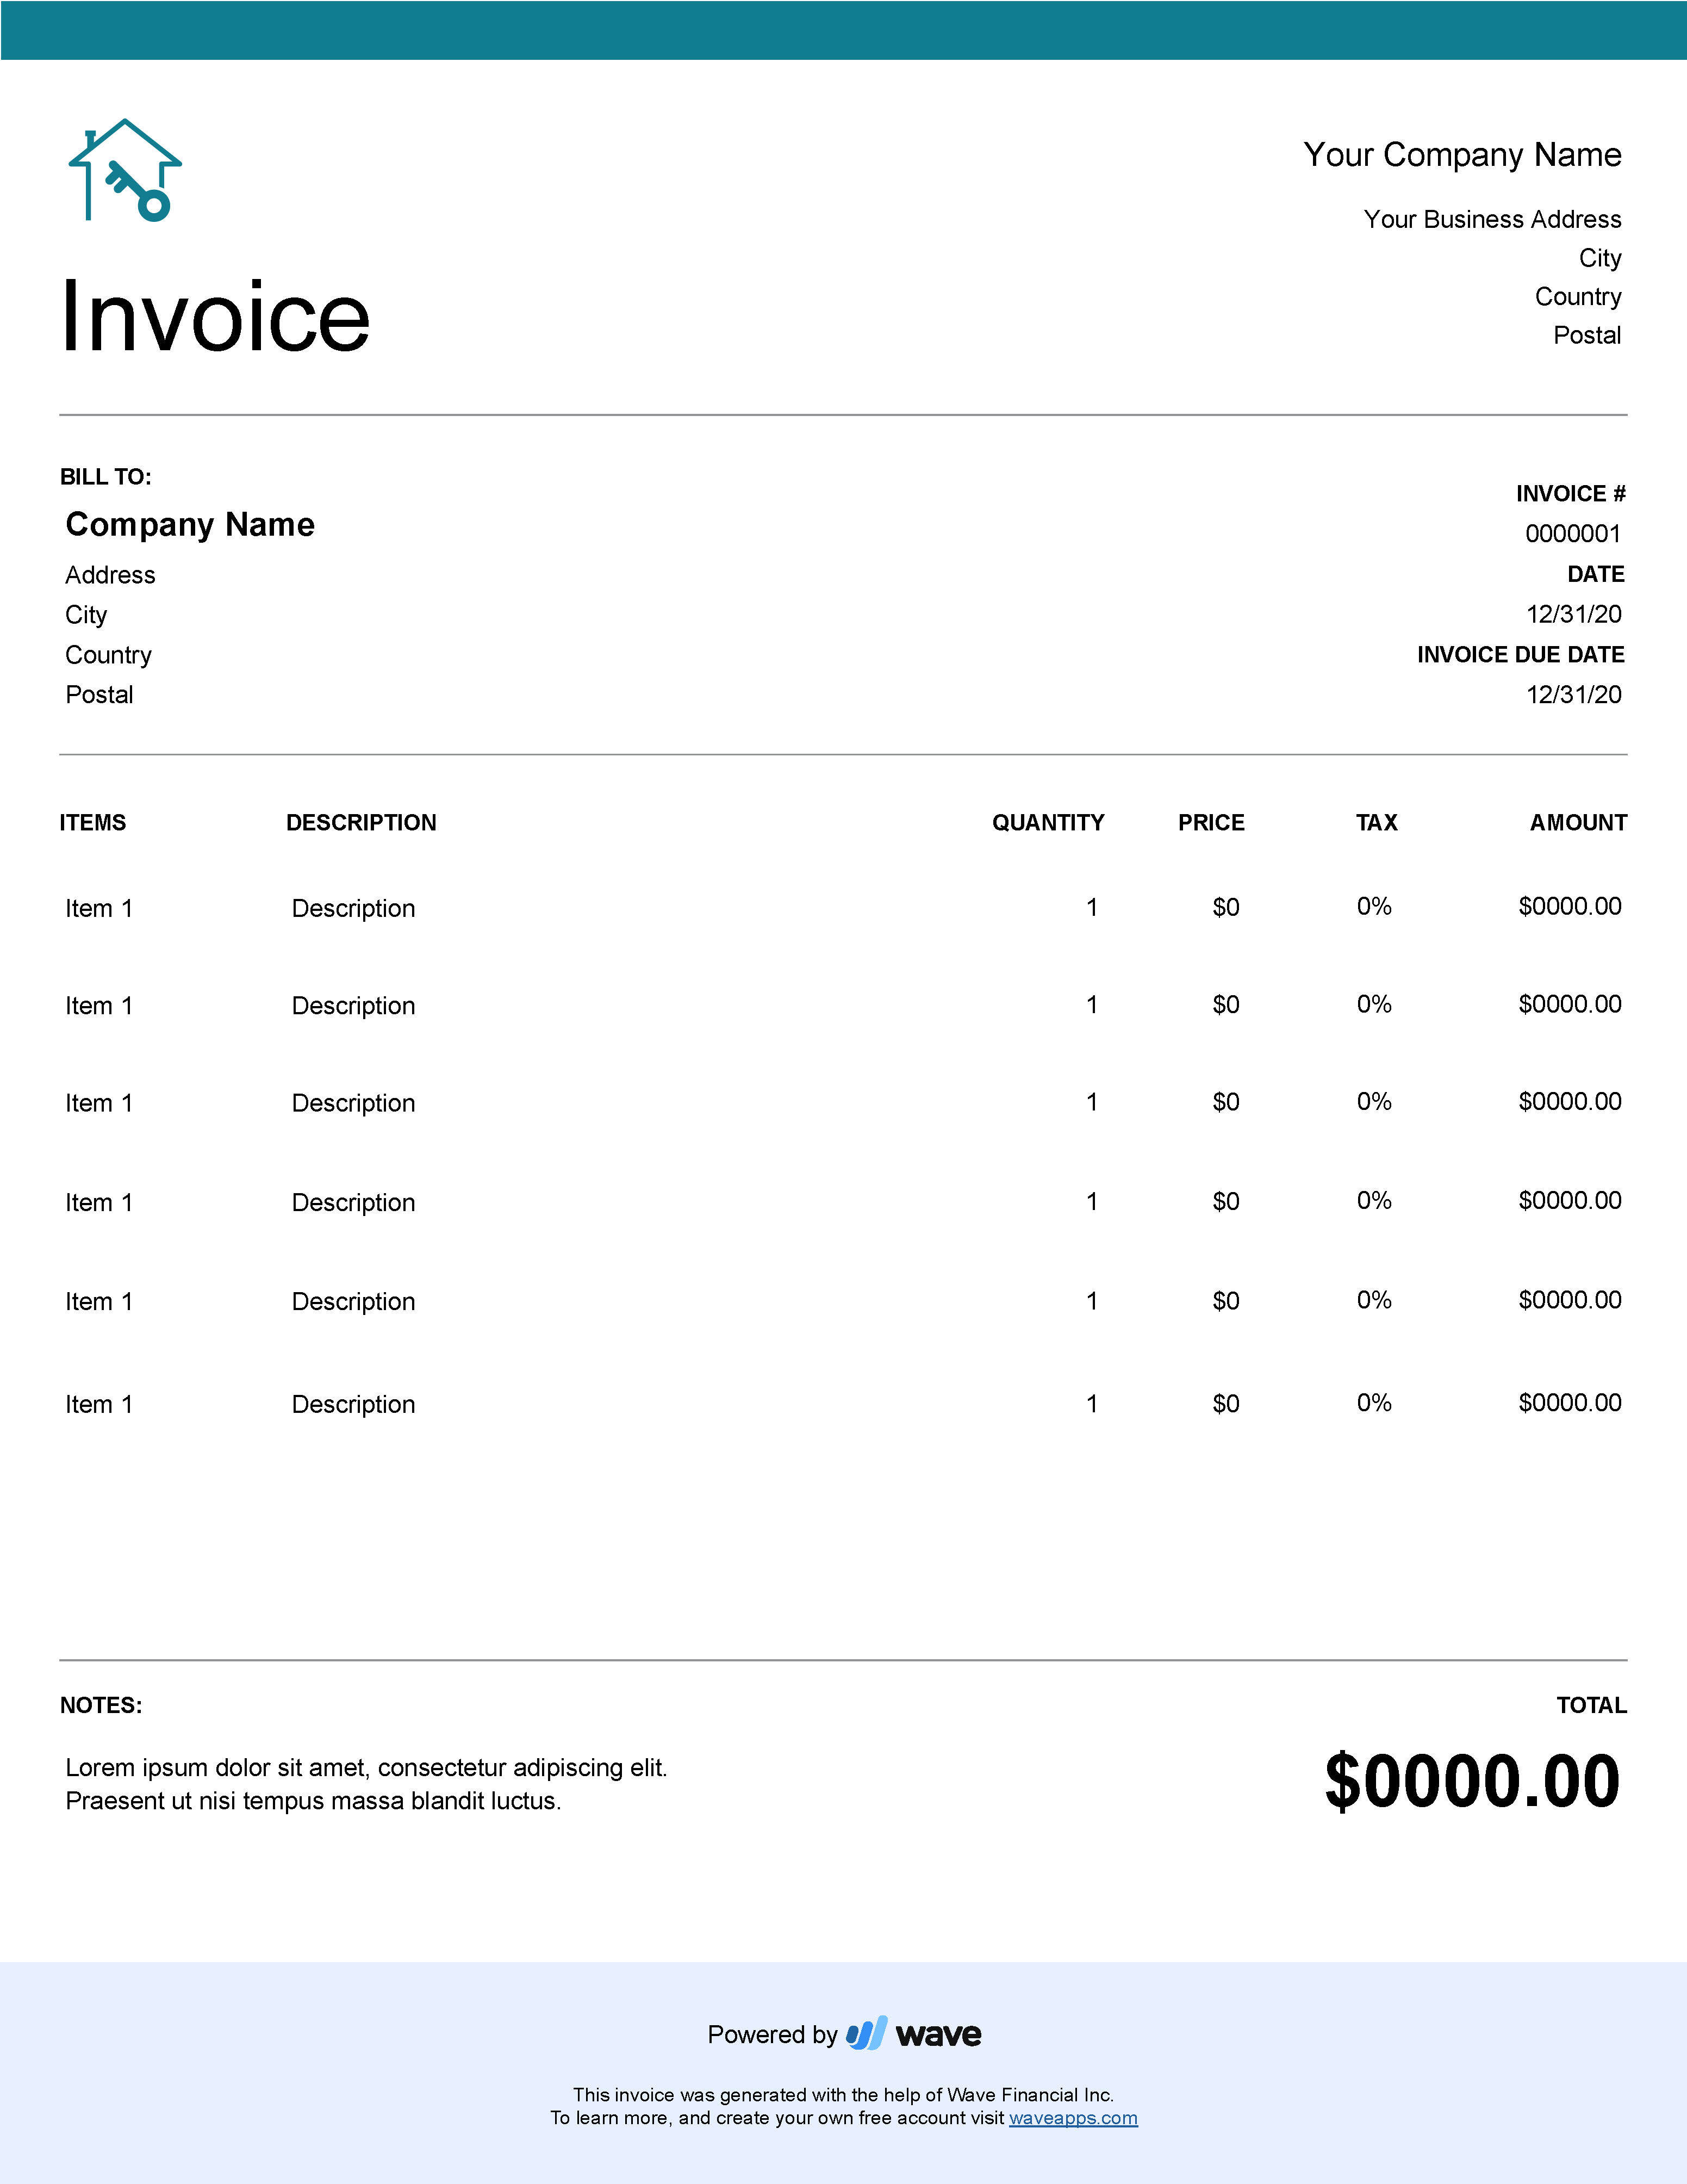 rent-invoice-template-free-download-rent-invoice-templates